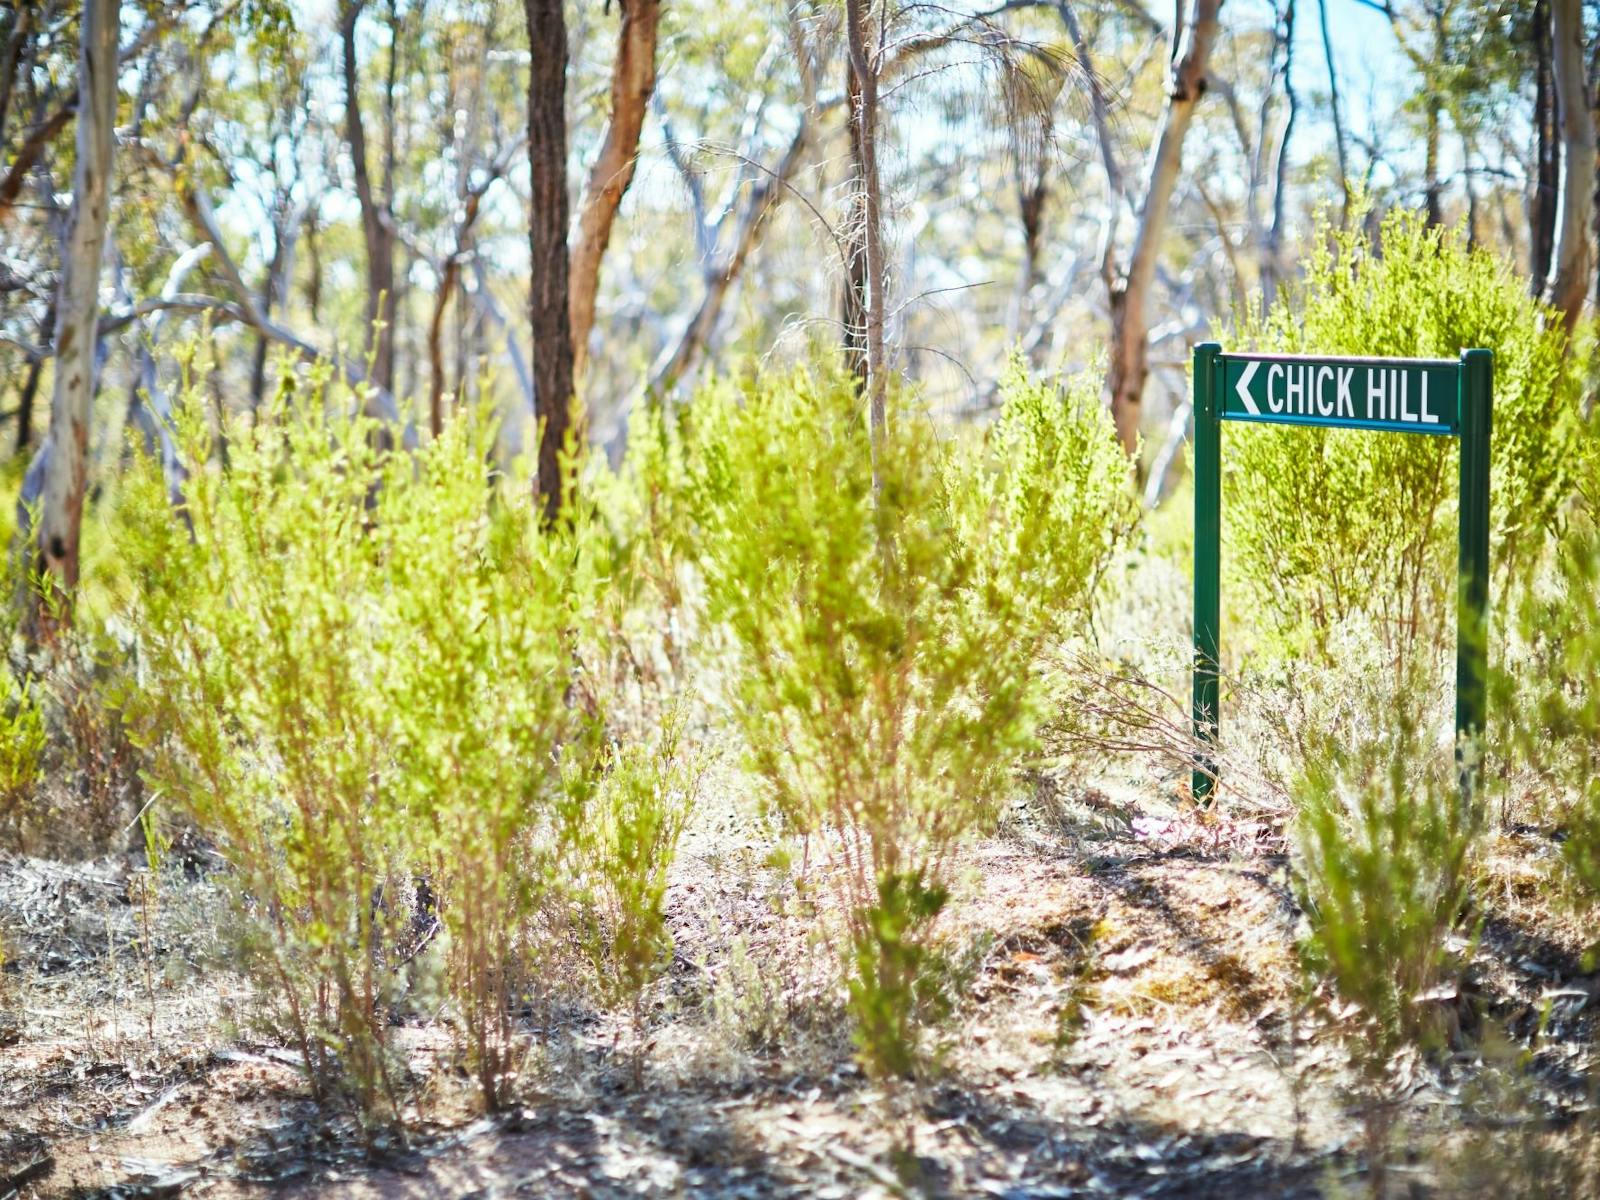 Green directional sign, green bushy plants, gum trees with grey, white and brown markings, sunrise